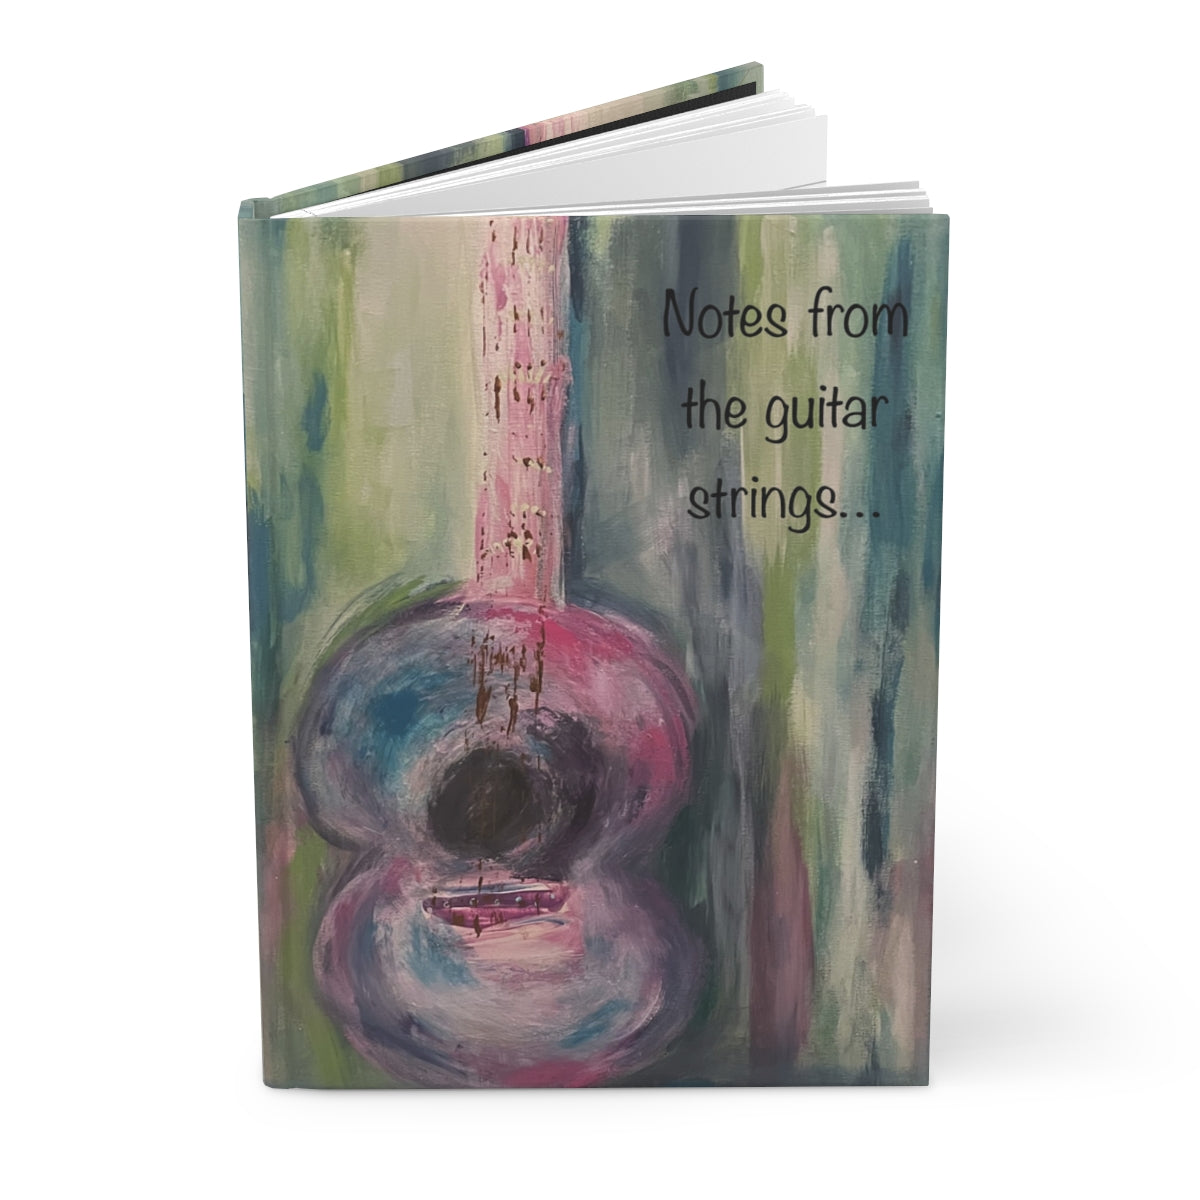 Make your everyday journaling more personal, private, and stylish with this matte hardcover journal featuring "I'm Just a Girl", an abstract painting of a Martin acoustic guitar. .: Full wraparound print 150 lined single pages.: Casewrap binding Journal Height, in 8.07 Width, in 5.71 Depth, in 0.55 #journal #journaling